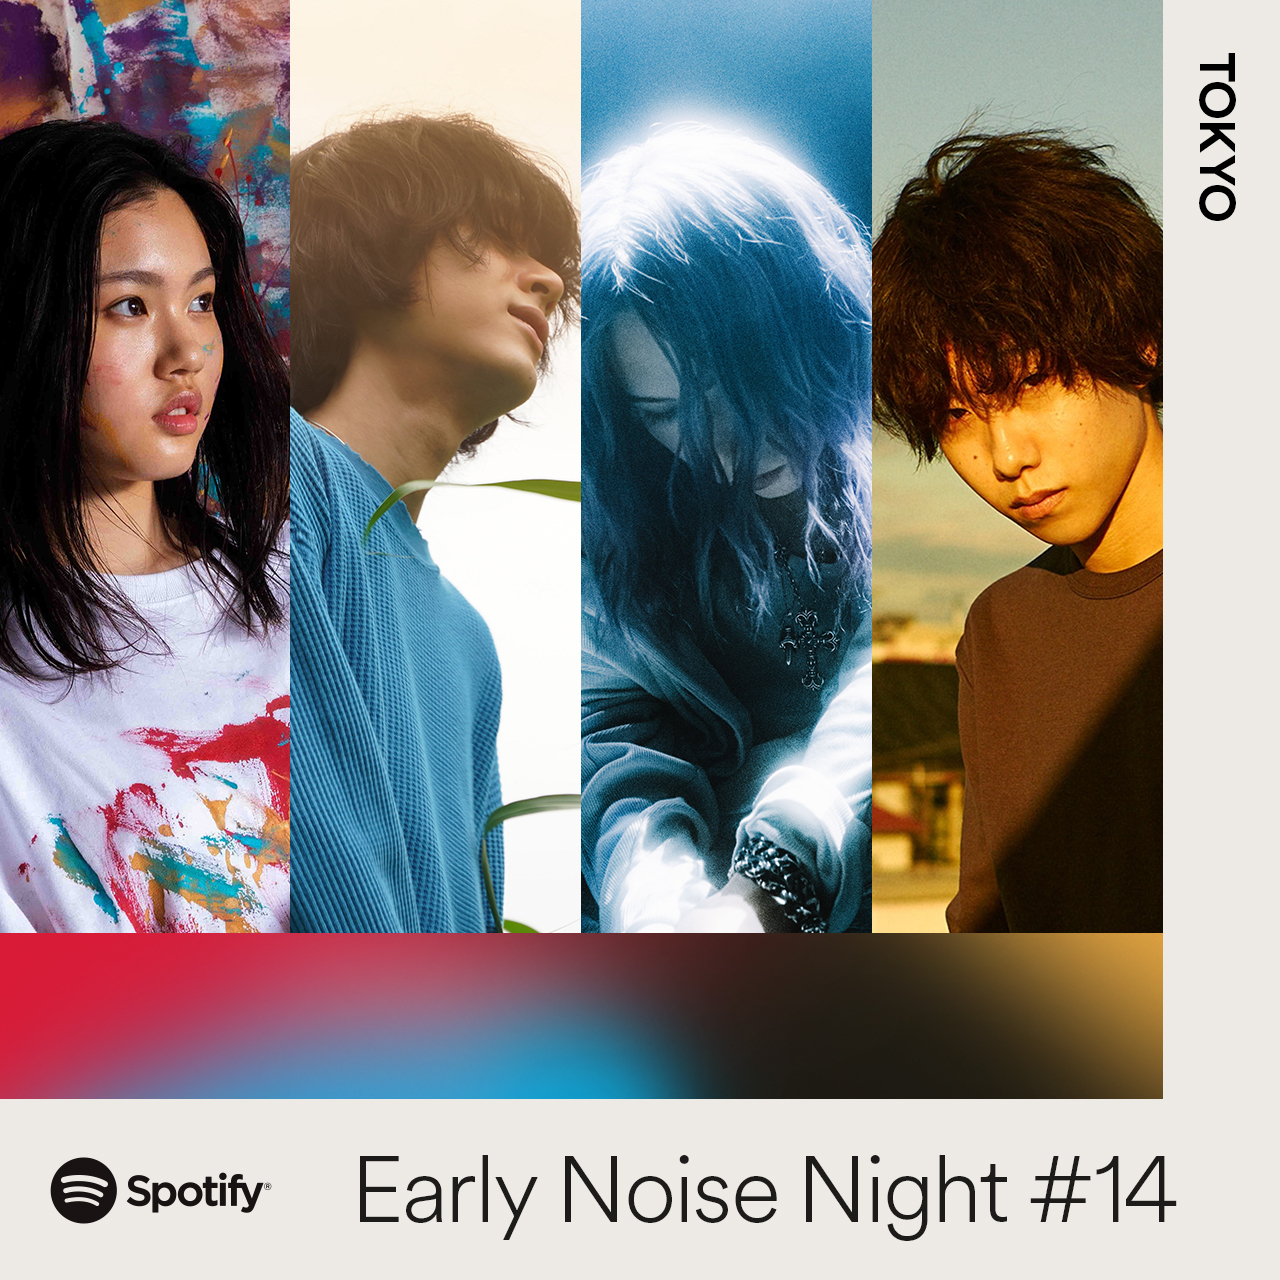 Spotify Early Noise Night #14